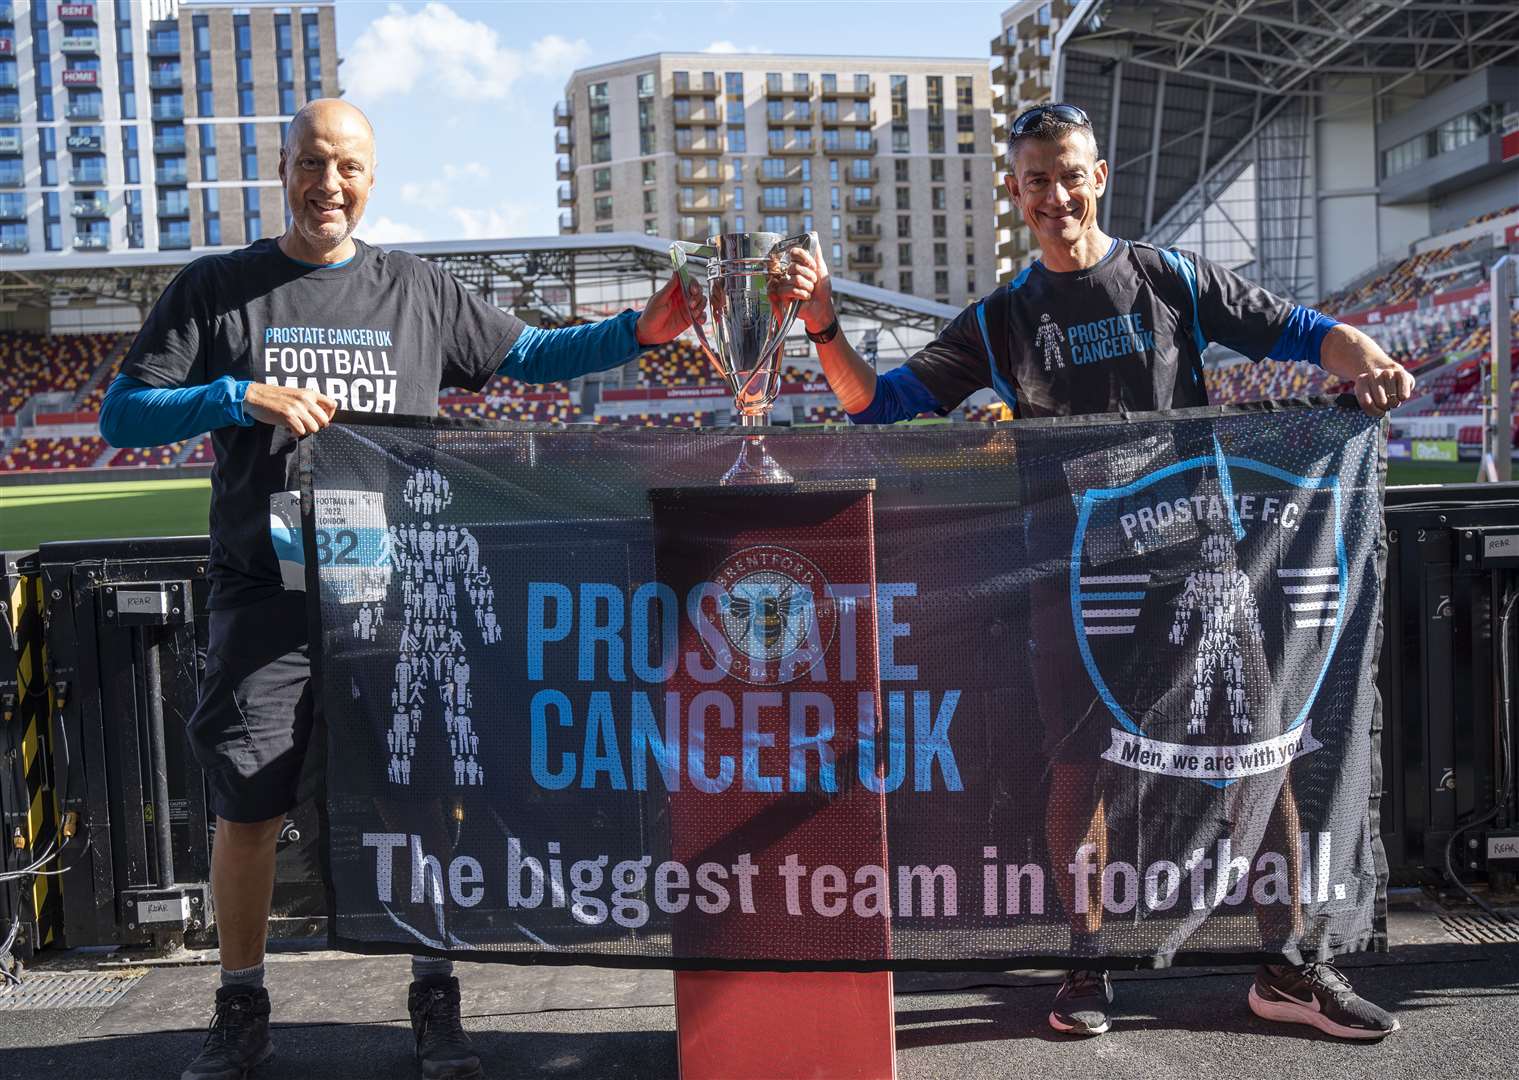 Kevin Webber (left) and Ian Tetsill (right) at Jeff Stelling’s football march in London (Rosie Lonsdale/Prostate Cancer UK)